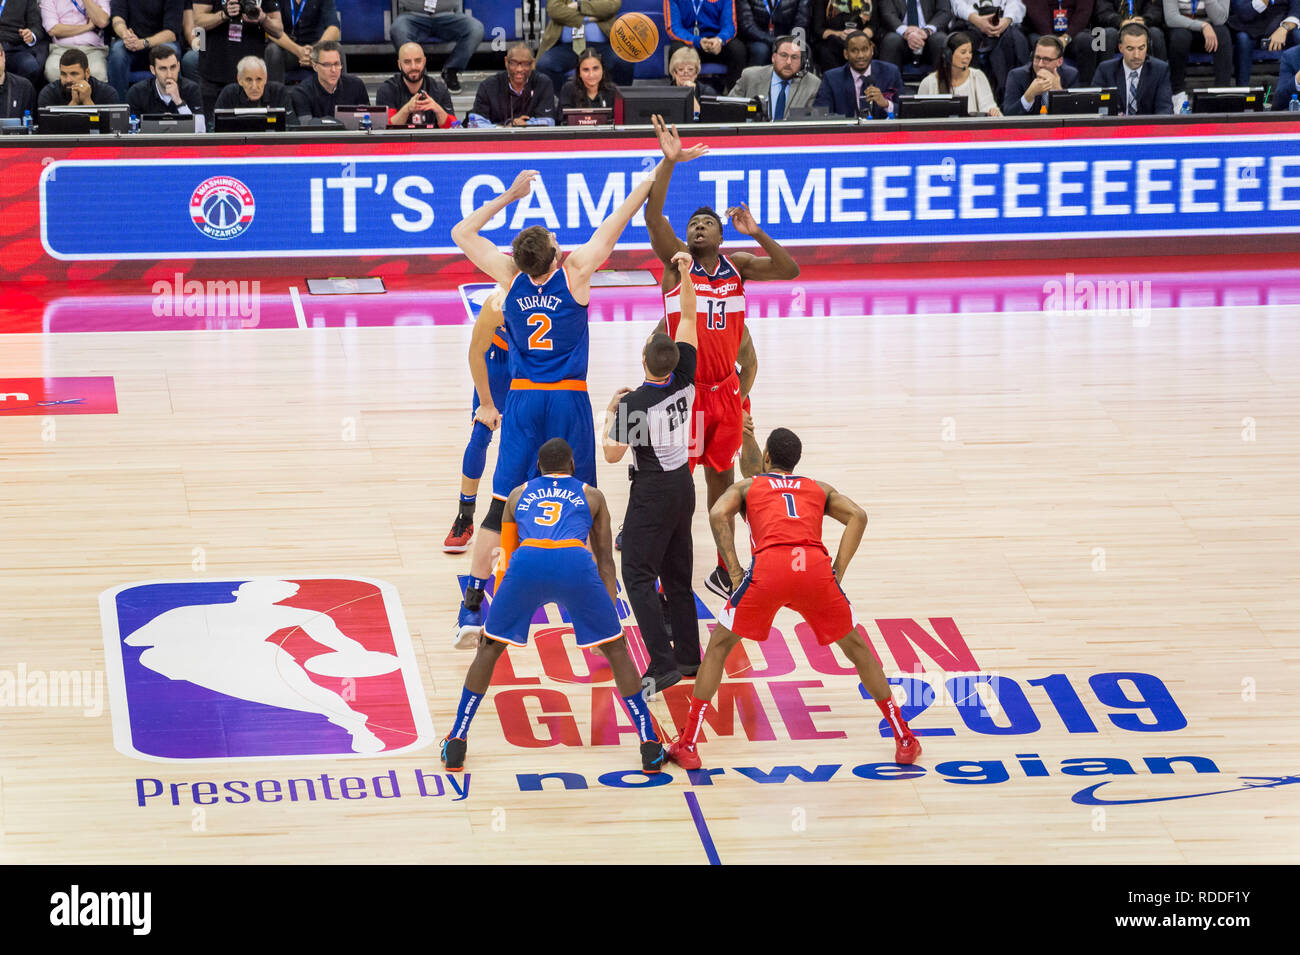 Londo , UK. 17 January 2019. Luke Kornet, Knicks' Forward-Center, No.2, and  Thomas Bryant, Wizards' Center, No.13, jump at the tip off at the start of  the NBA basketball game, NBA London